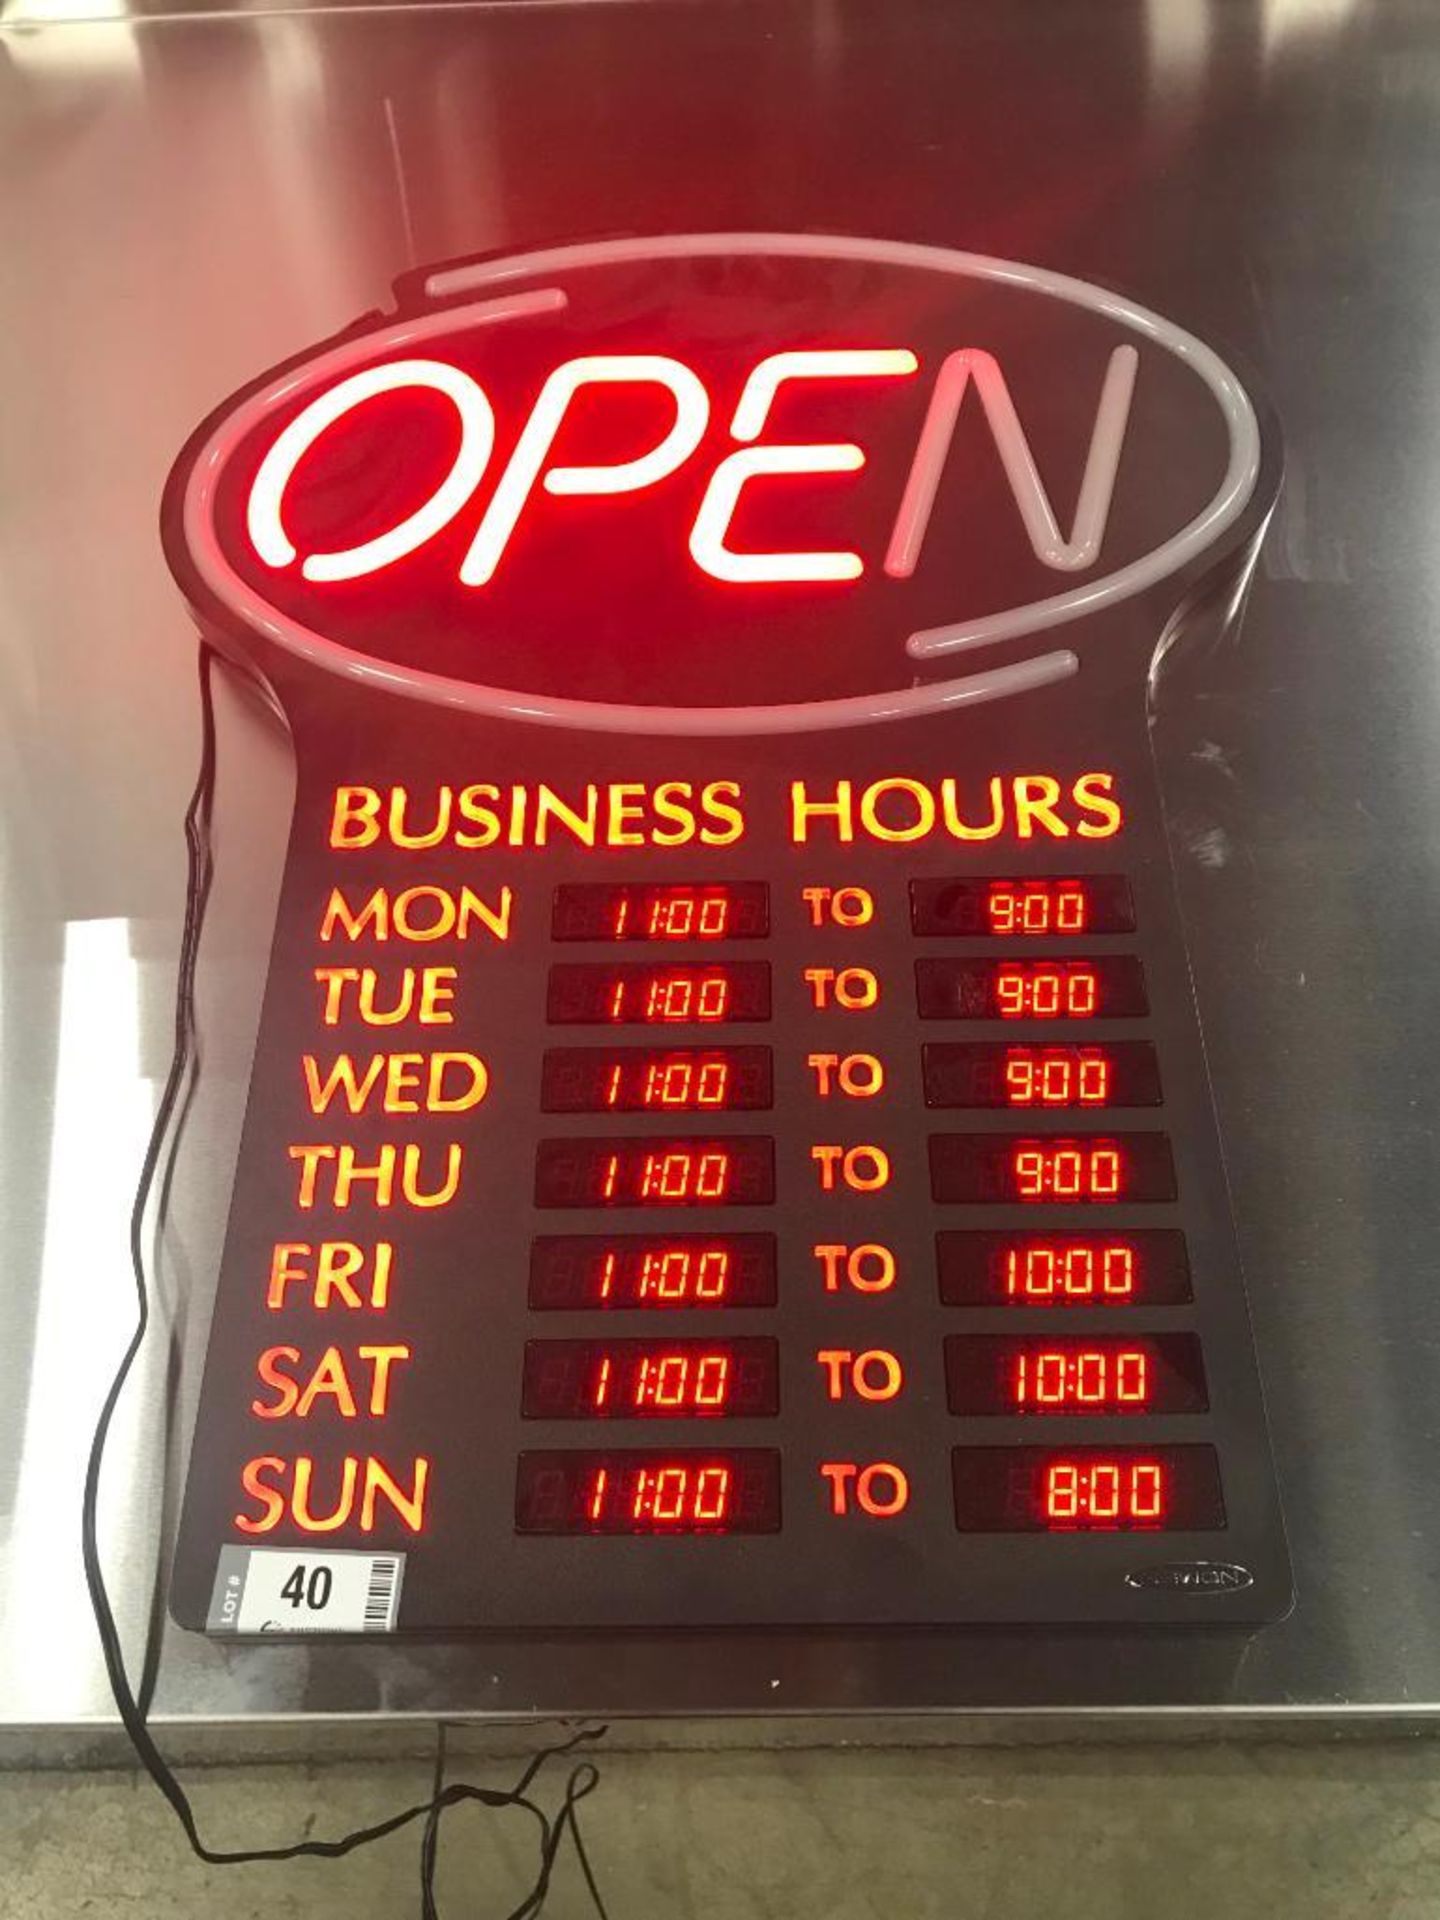 NEWON LED OPEN SIGN WITH PROGRAMMABLE BUSINESS HOURS AND FLASHING EFFECTS - Image 3 of 8